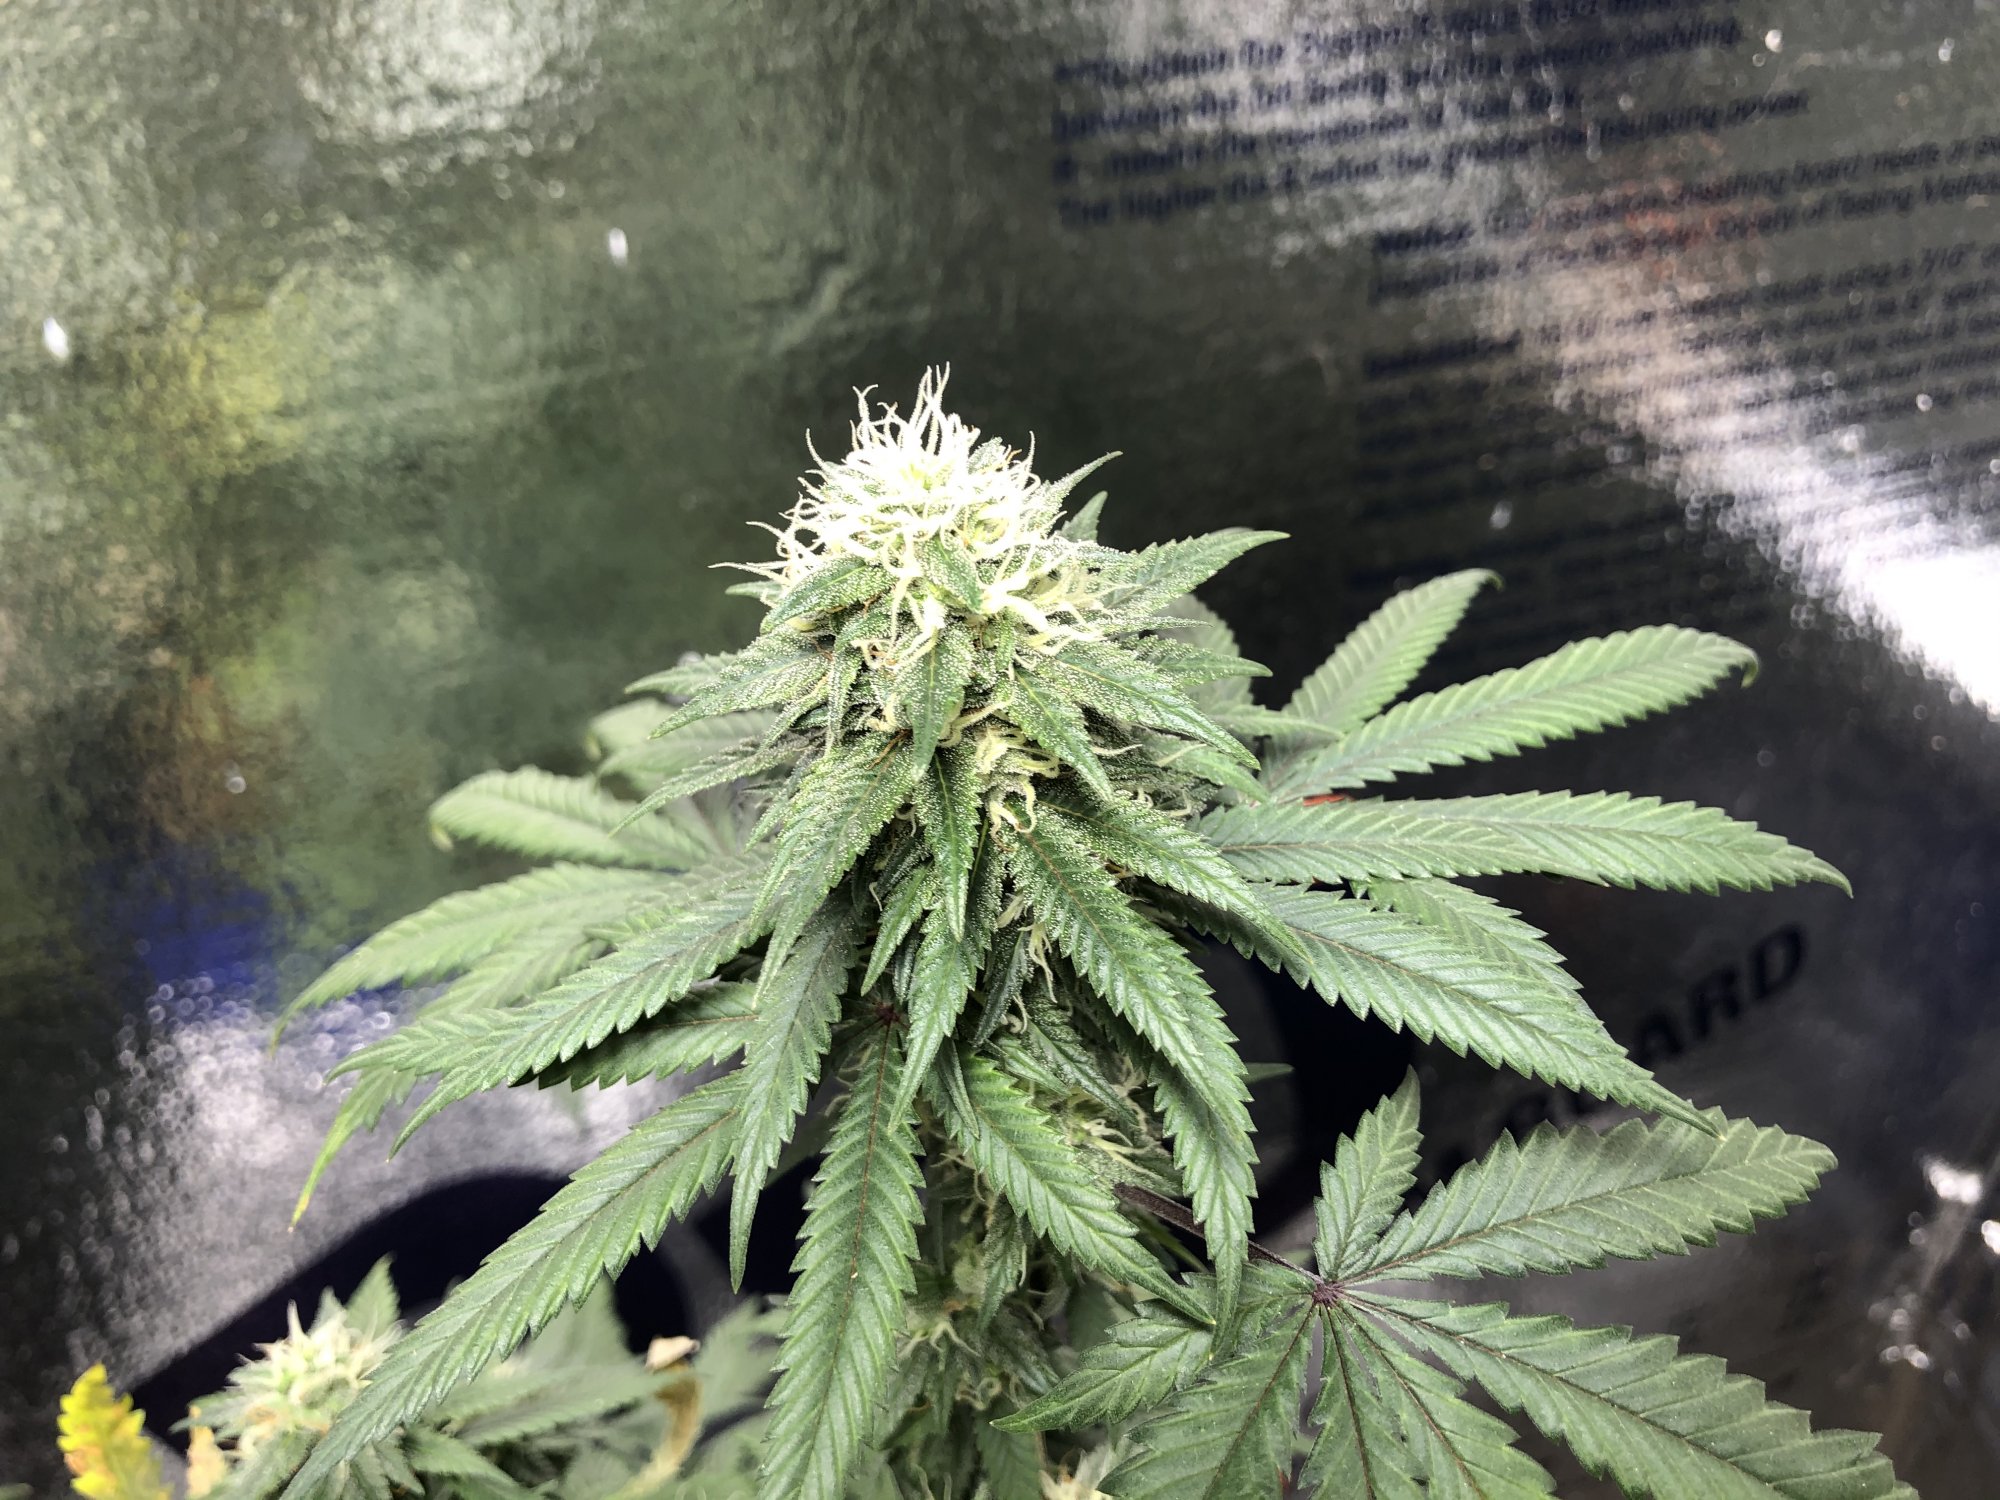 Day 48 flower w nutrient issues advice needed 4